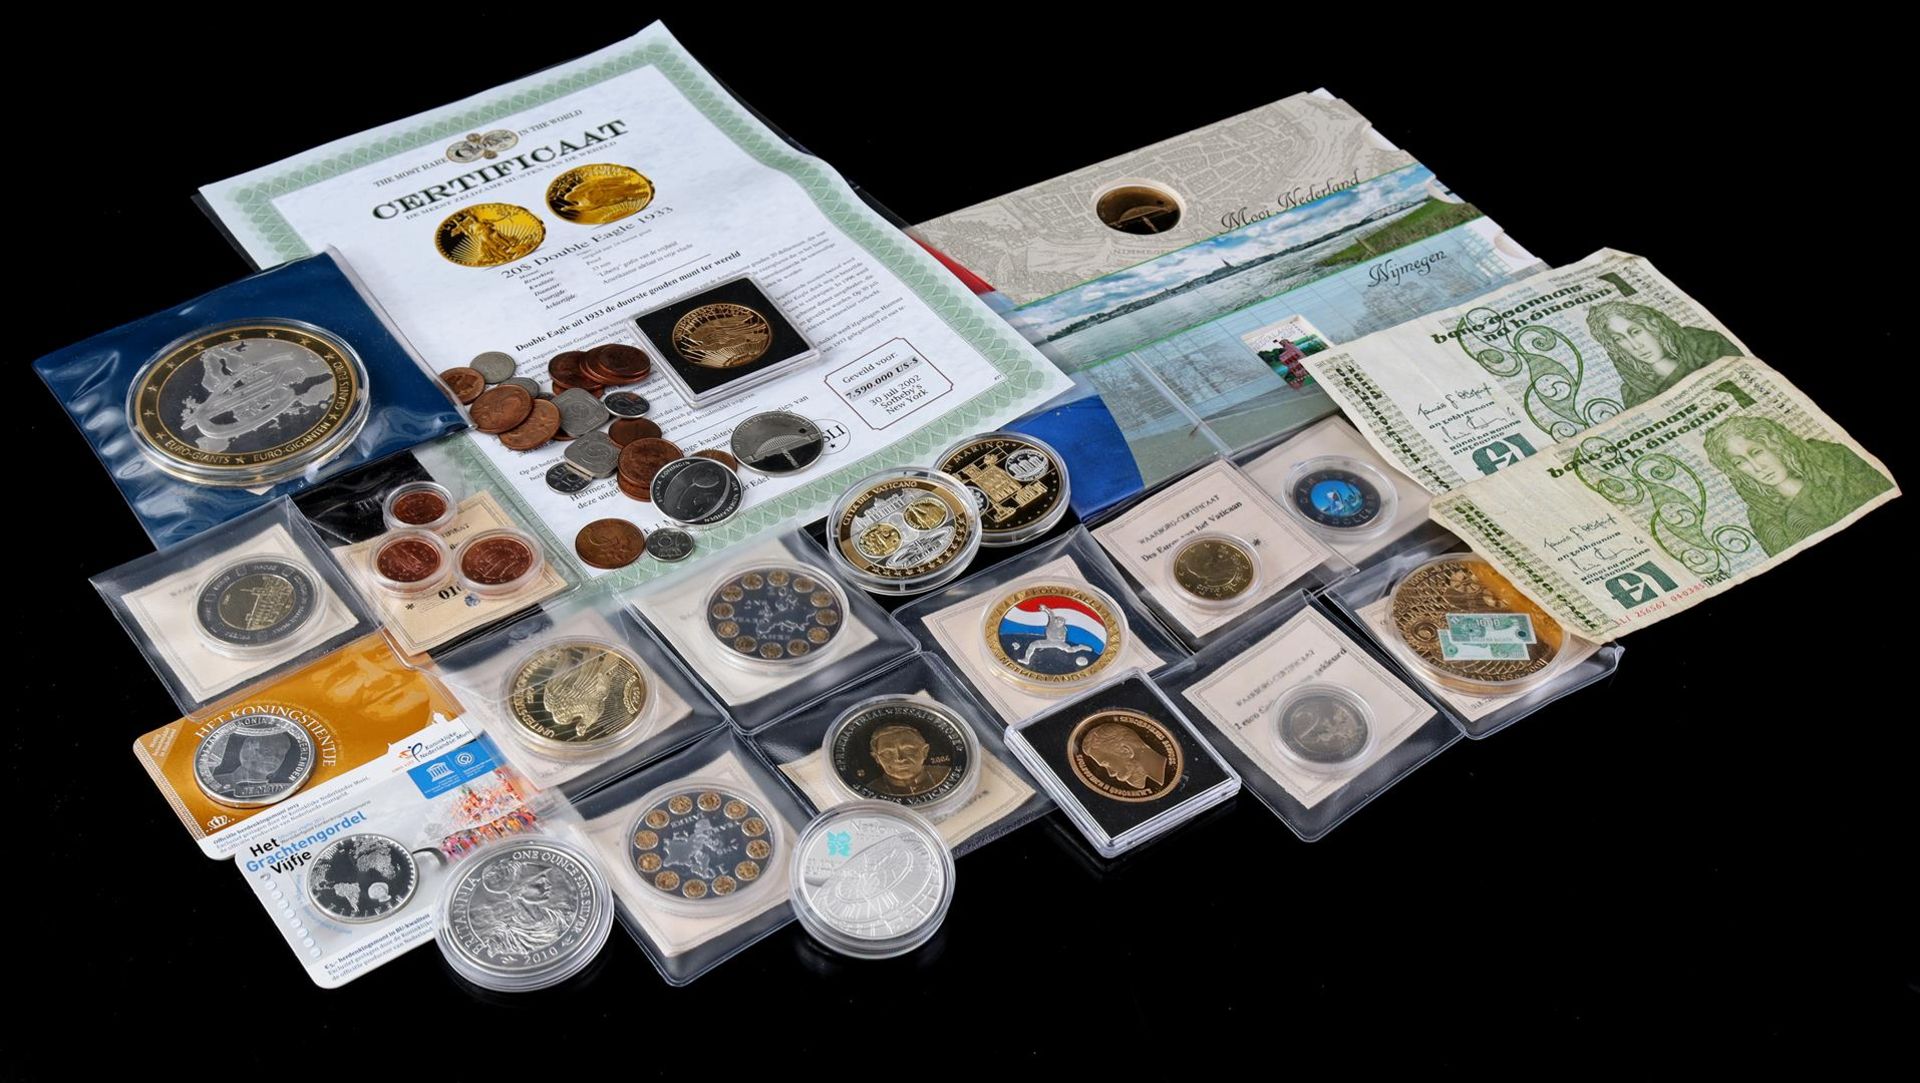 Lot various coins, medals and banknotes